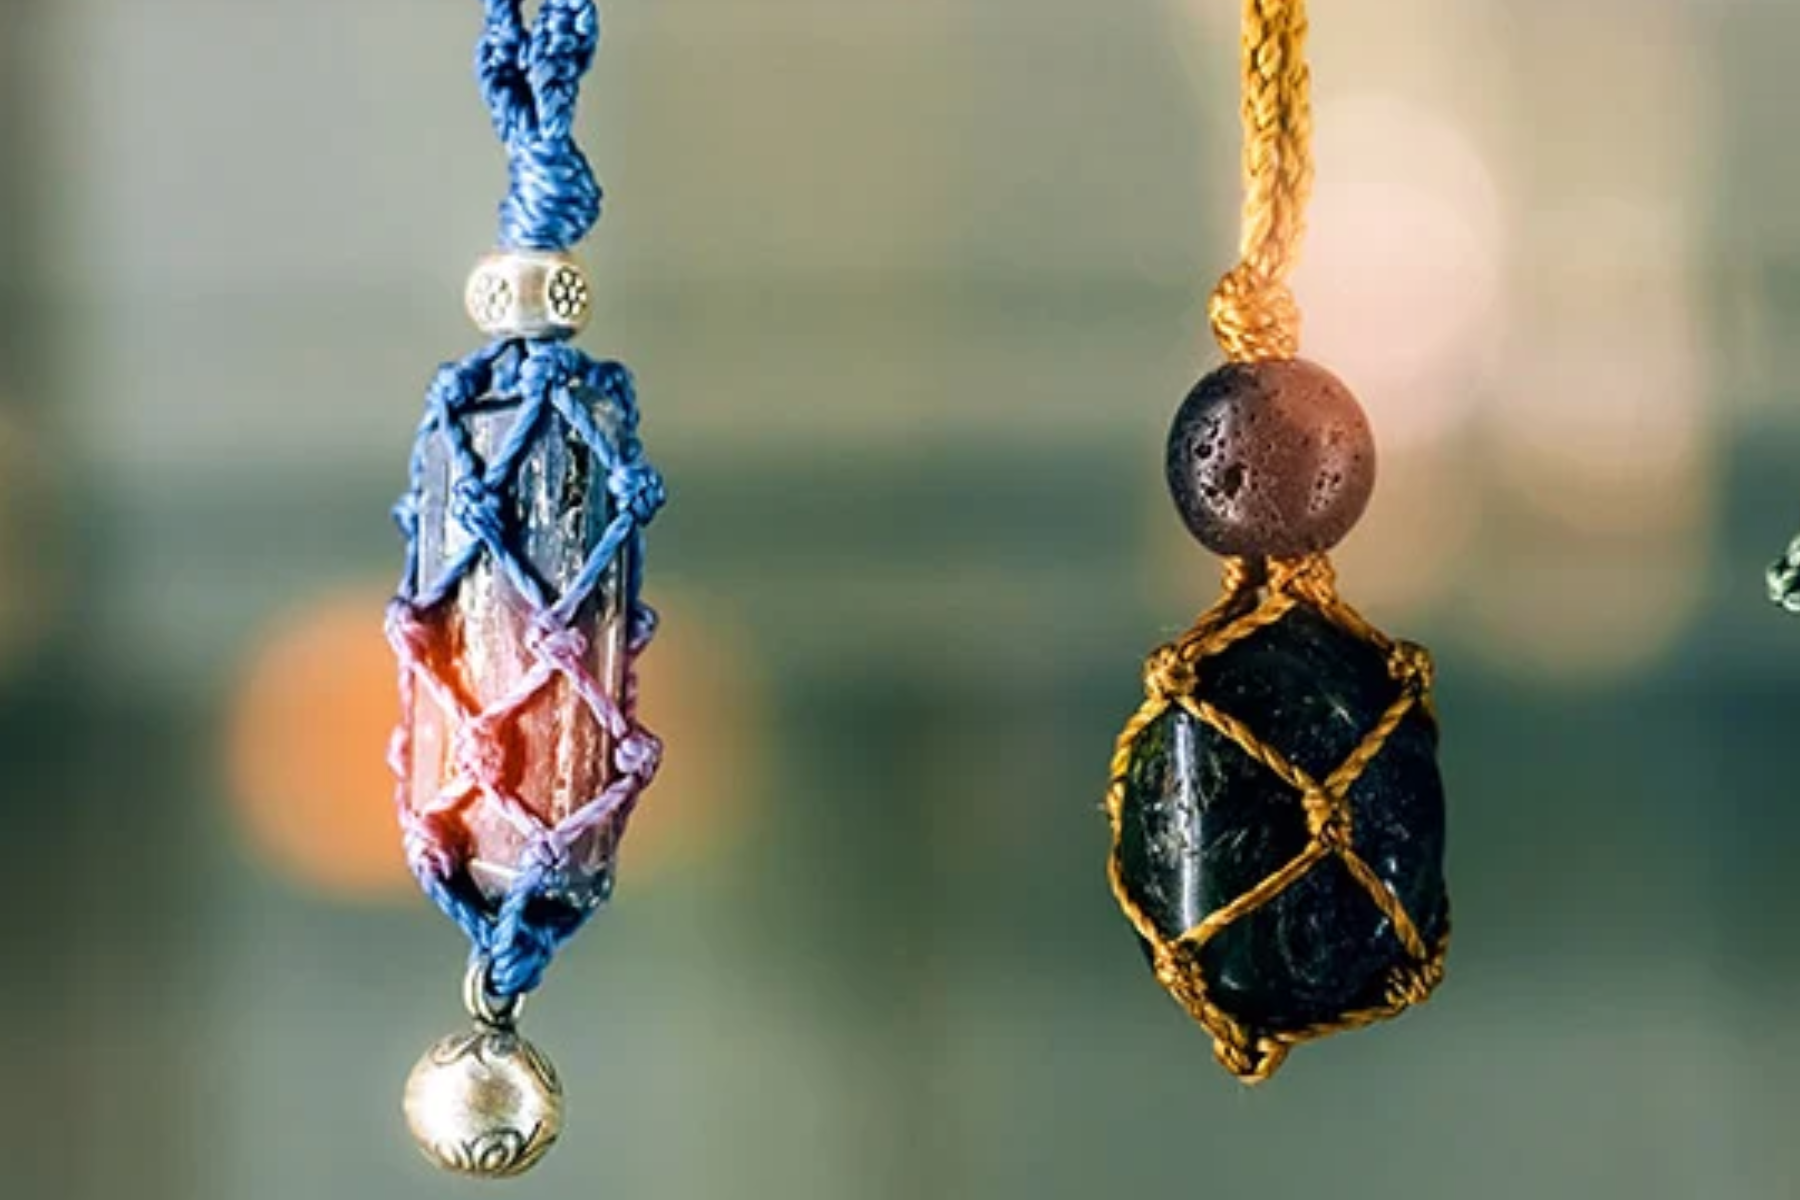 A photograph of two necklaces, one with blue beads and the other with yellow beads, both featuring a chakra pendant. The background is blurred and indistinct